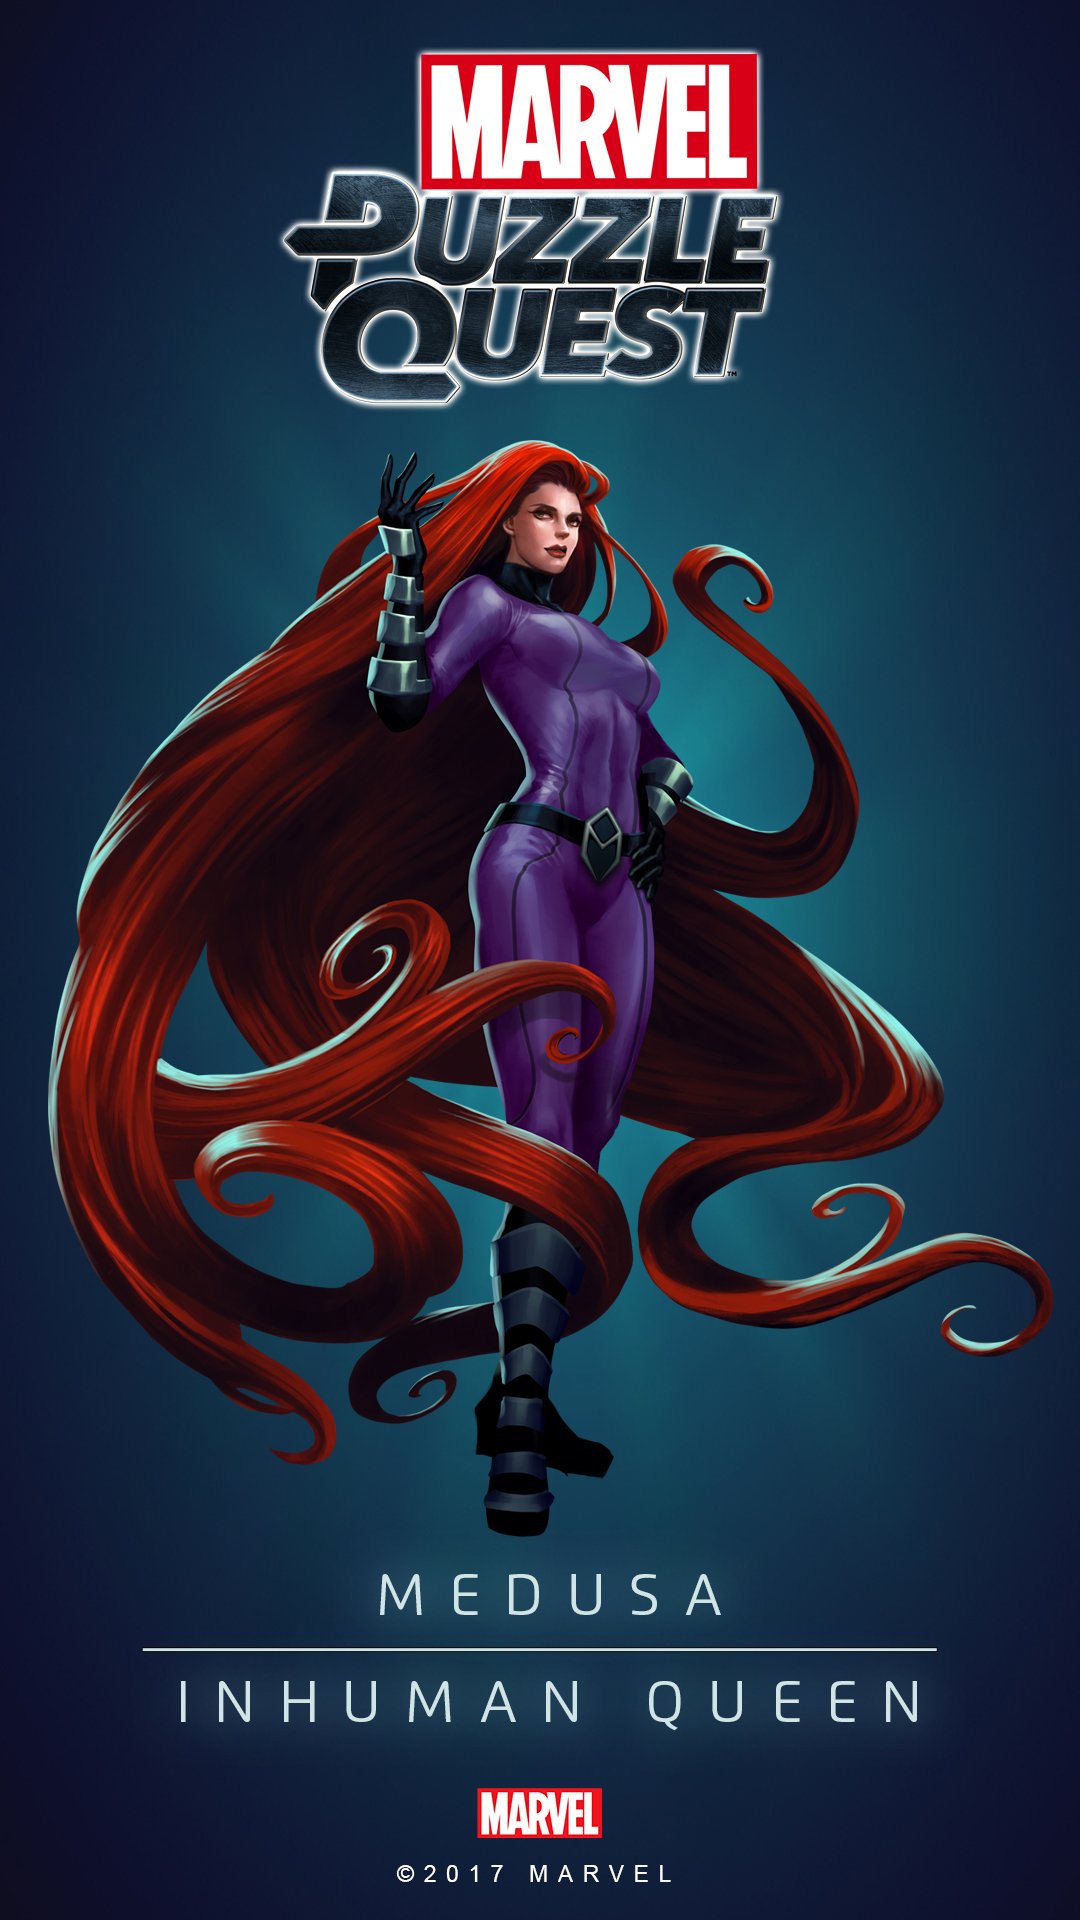 MARVEL Puzzle Quest way for the Queen of the Inhumans to rule your mobile display with new Medusa wallpaper. #MarvelPuzzleQuest